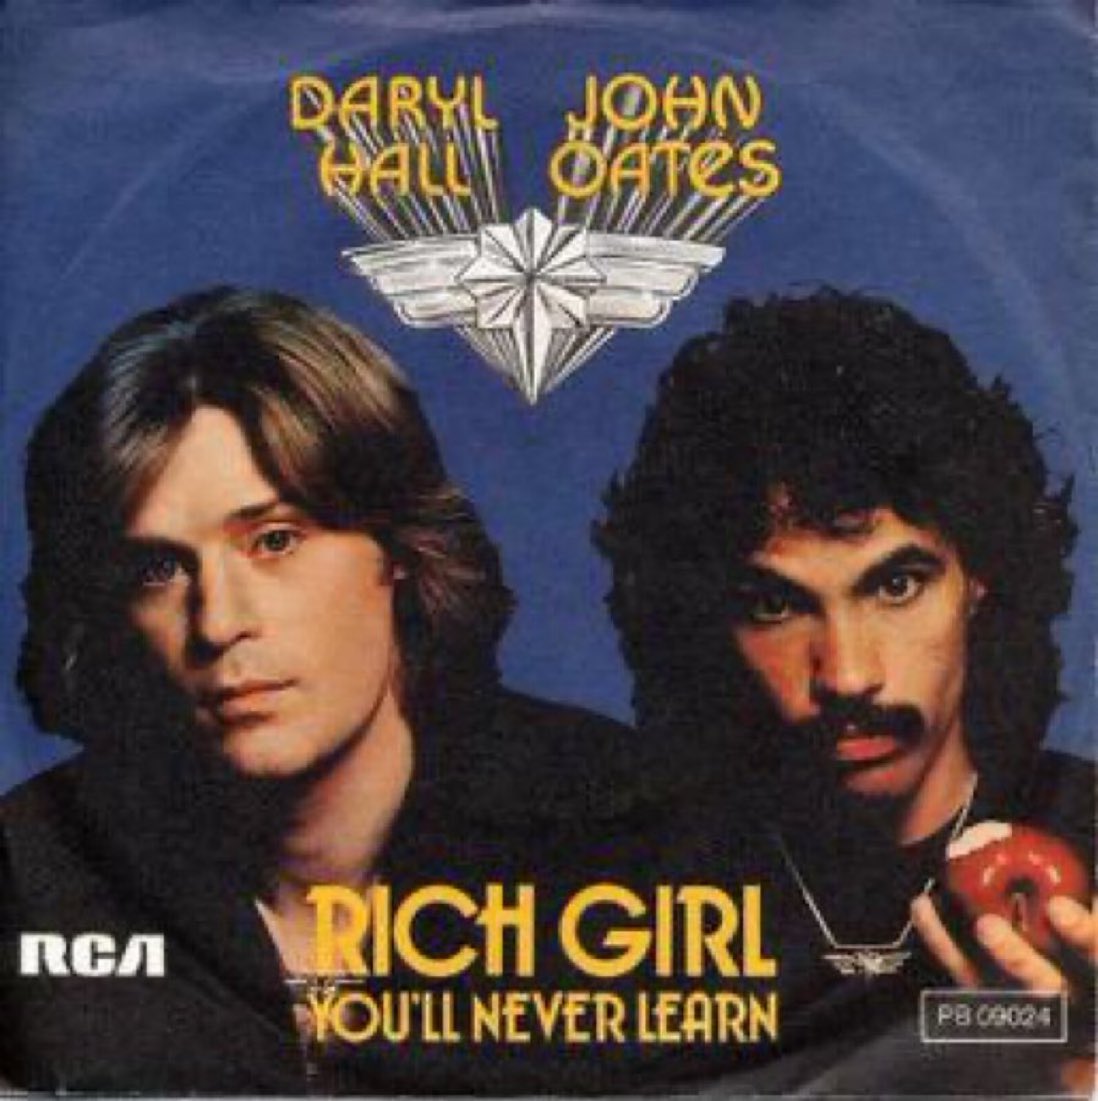 On March 26, 1977, “Rich Girl” by Hall & Oates hit number one on the Billboard Hot 100. It was their first of 6 number one hits and would hold the top spot for two weeks. #HallandOates